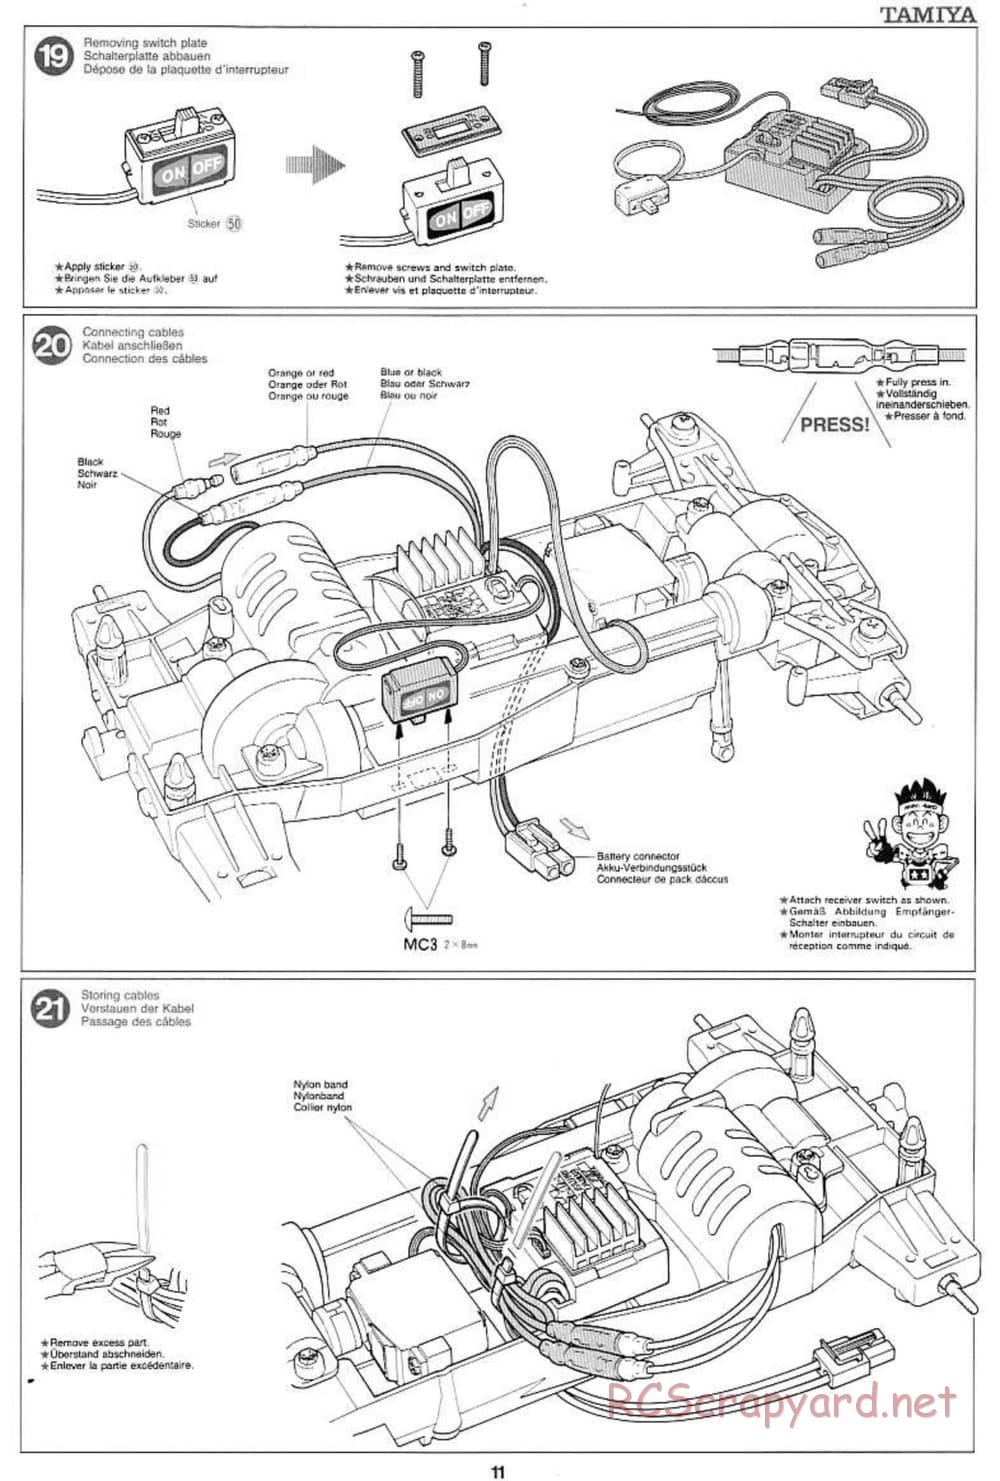 Tamiya - Voltec Fighter - Boy's 4WD Chassis - Manual - Page 11